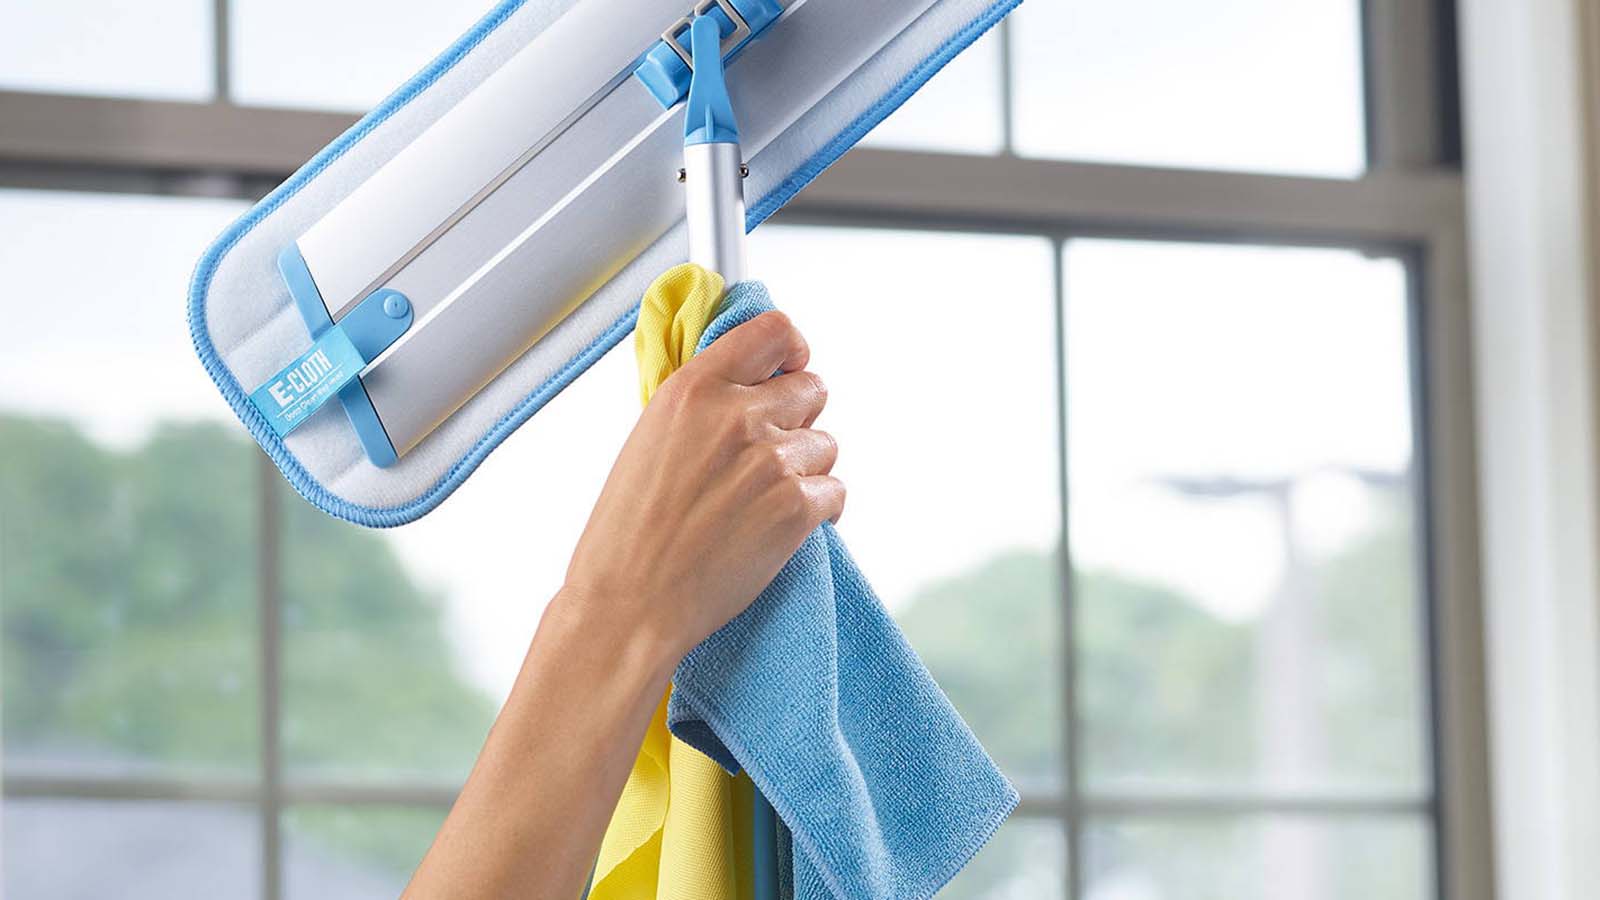 Your Must-Have House Cleaning Supplies